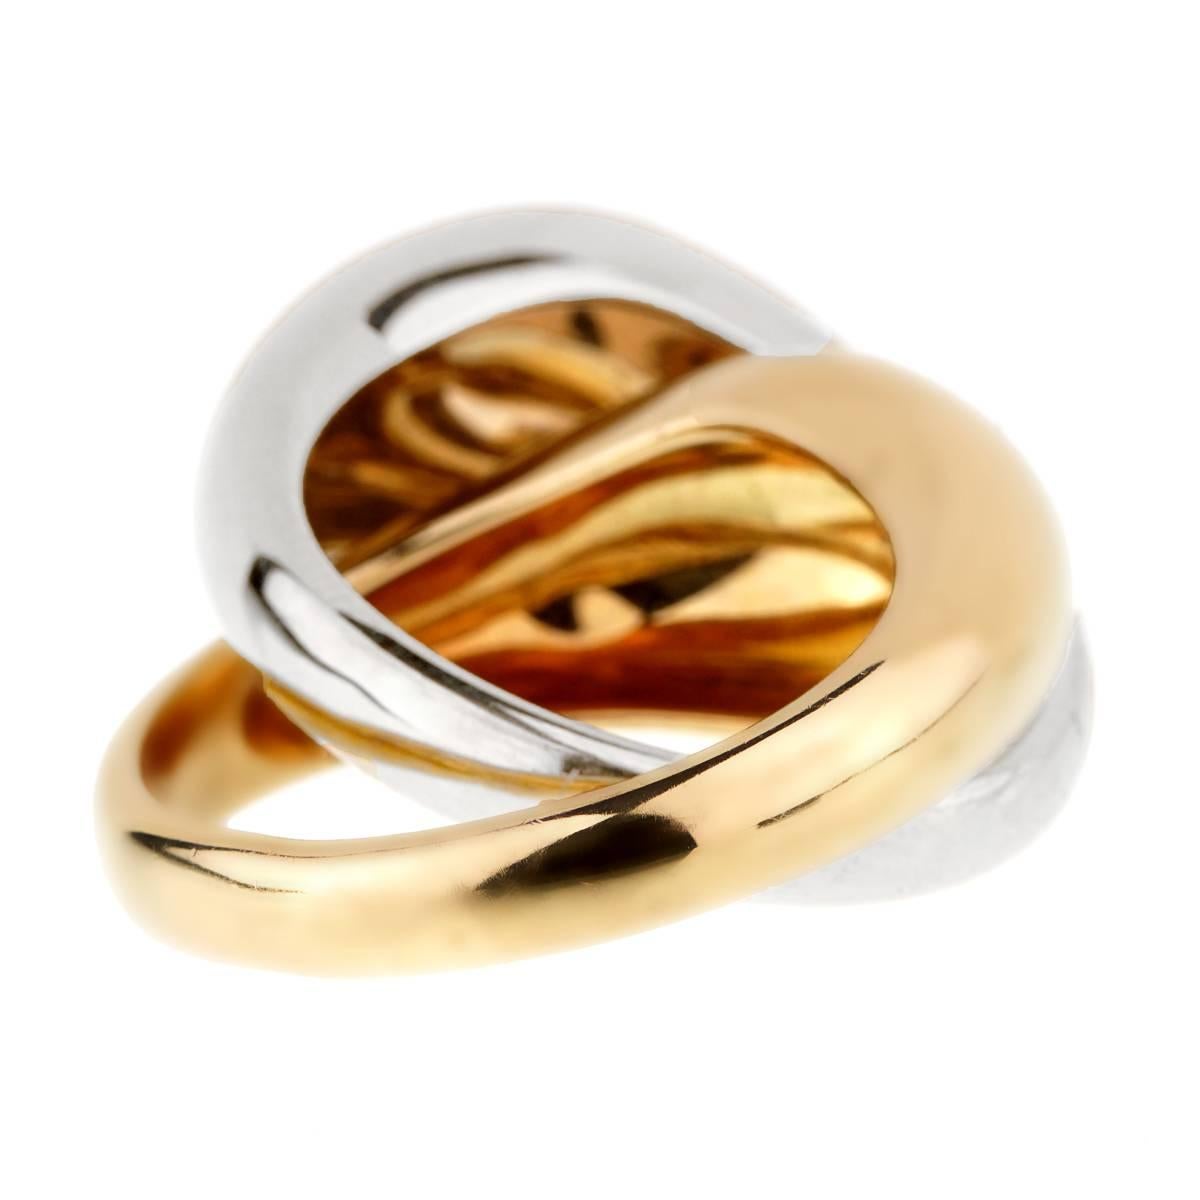 A stunning Pomellato ring featuring an interwoven design of 1 yellow gold ring and 1 white gold ring.    Size 6 1/2 Resizeable

Sku: 913
